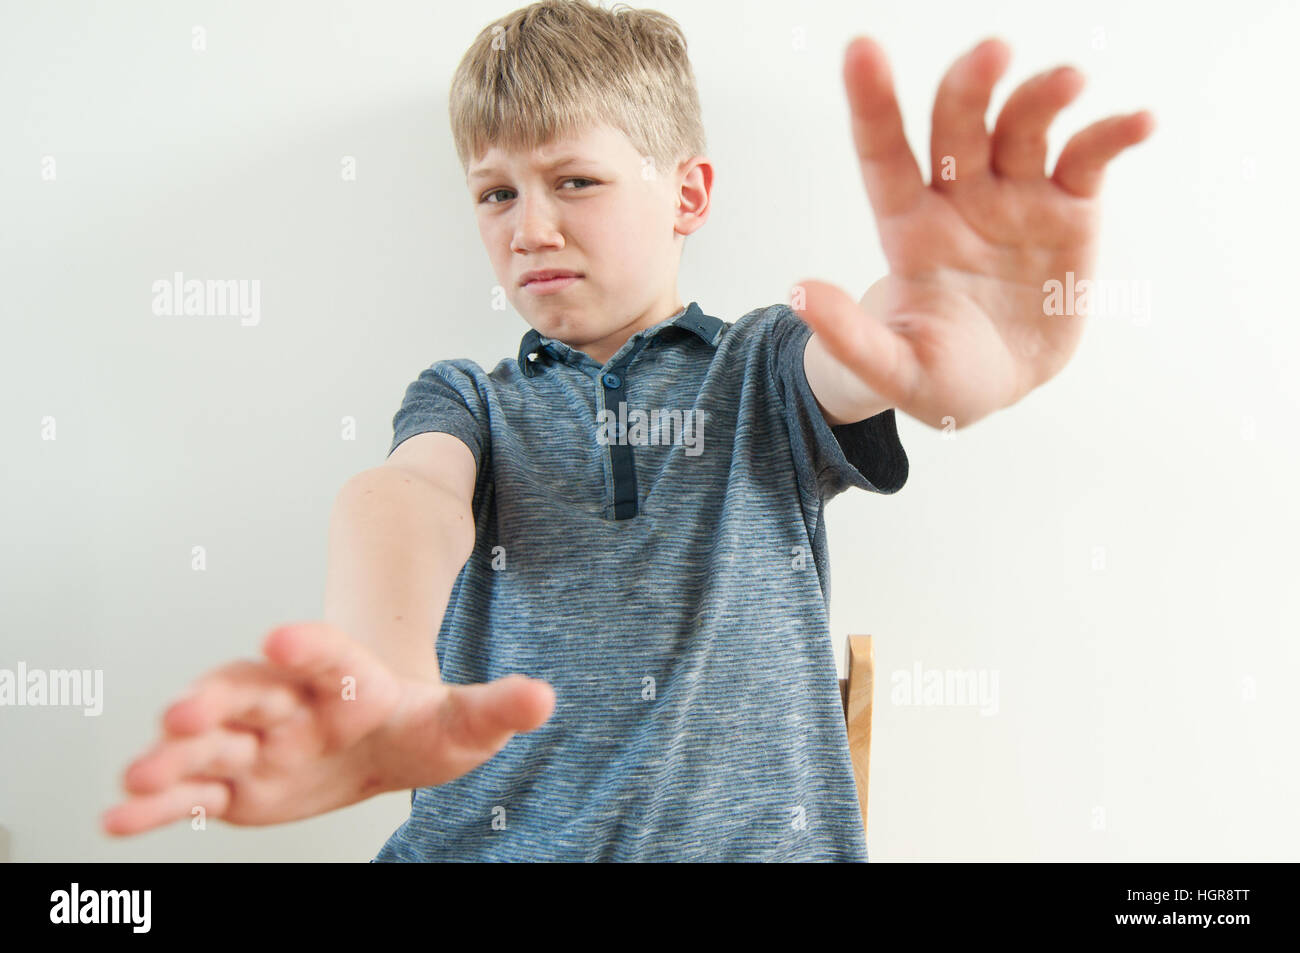 Point of view image of a young child scared from being attacked Stock Photo